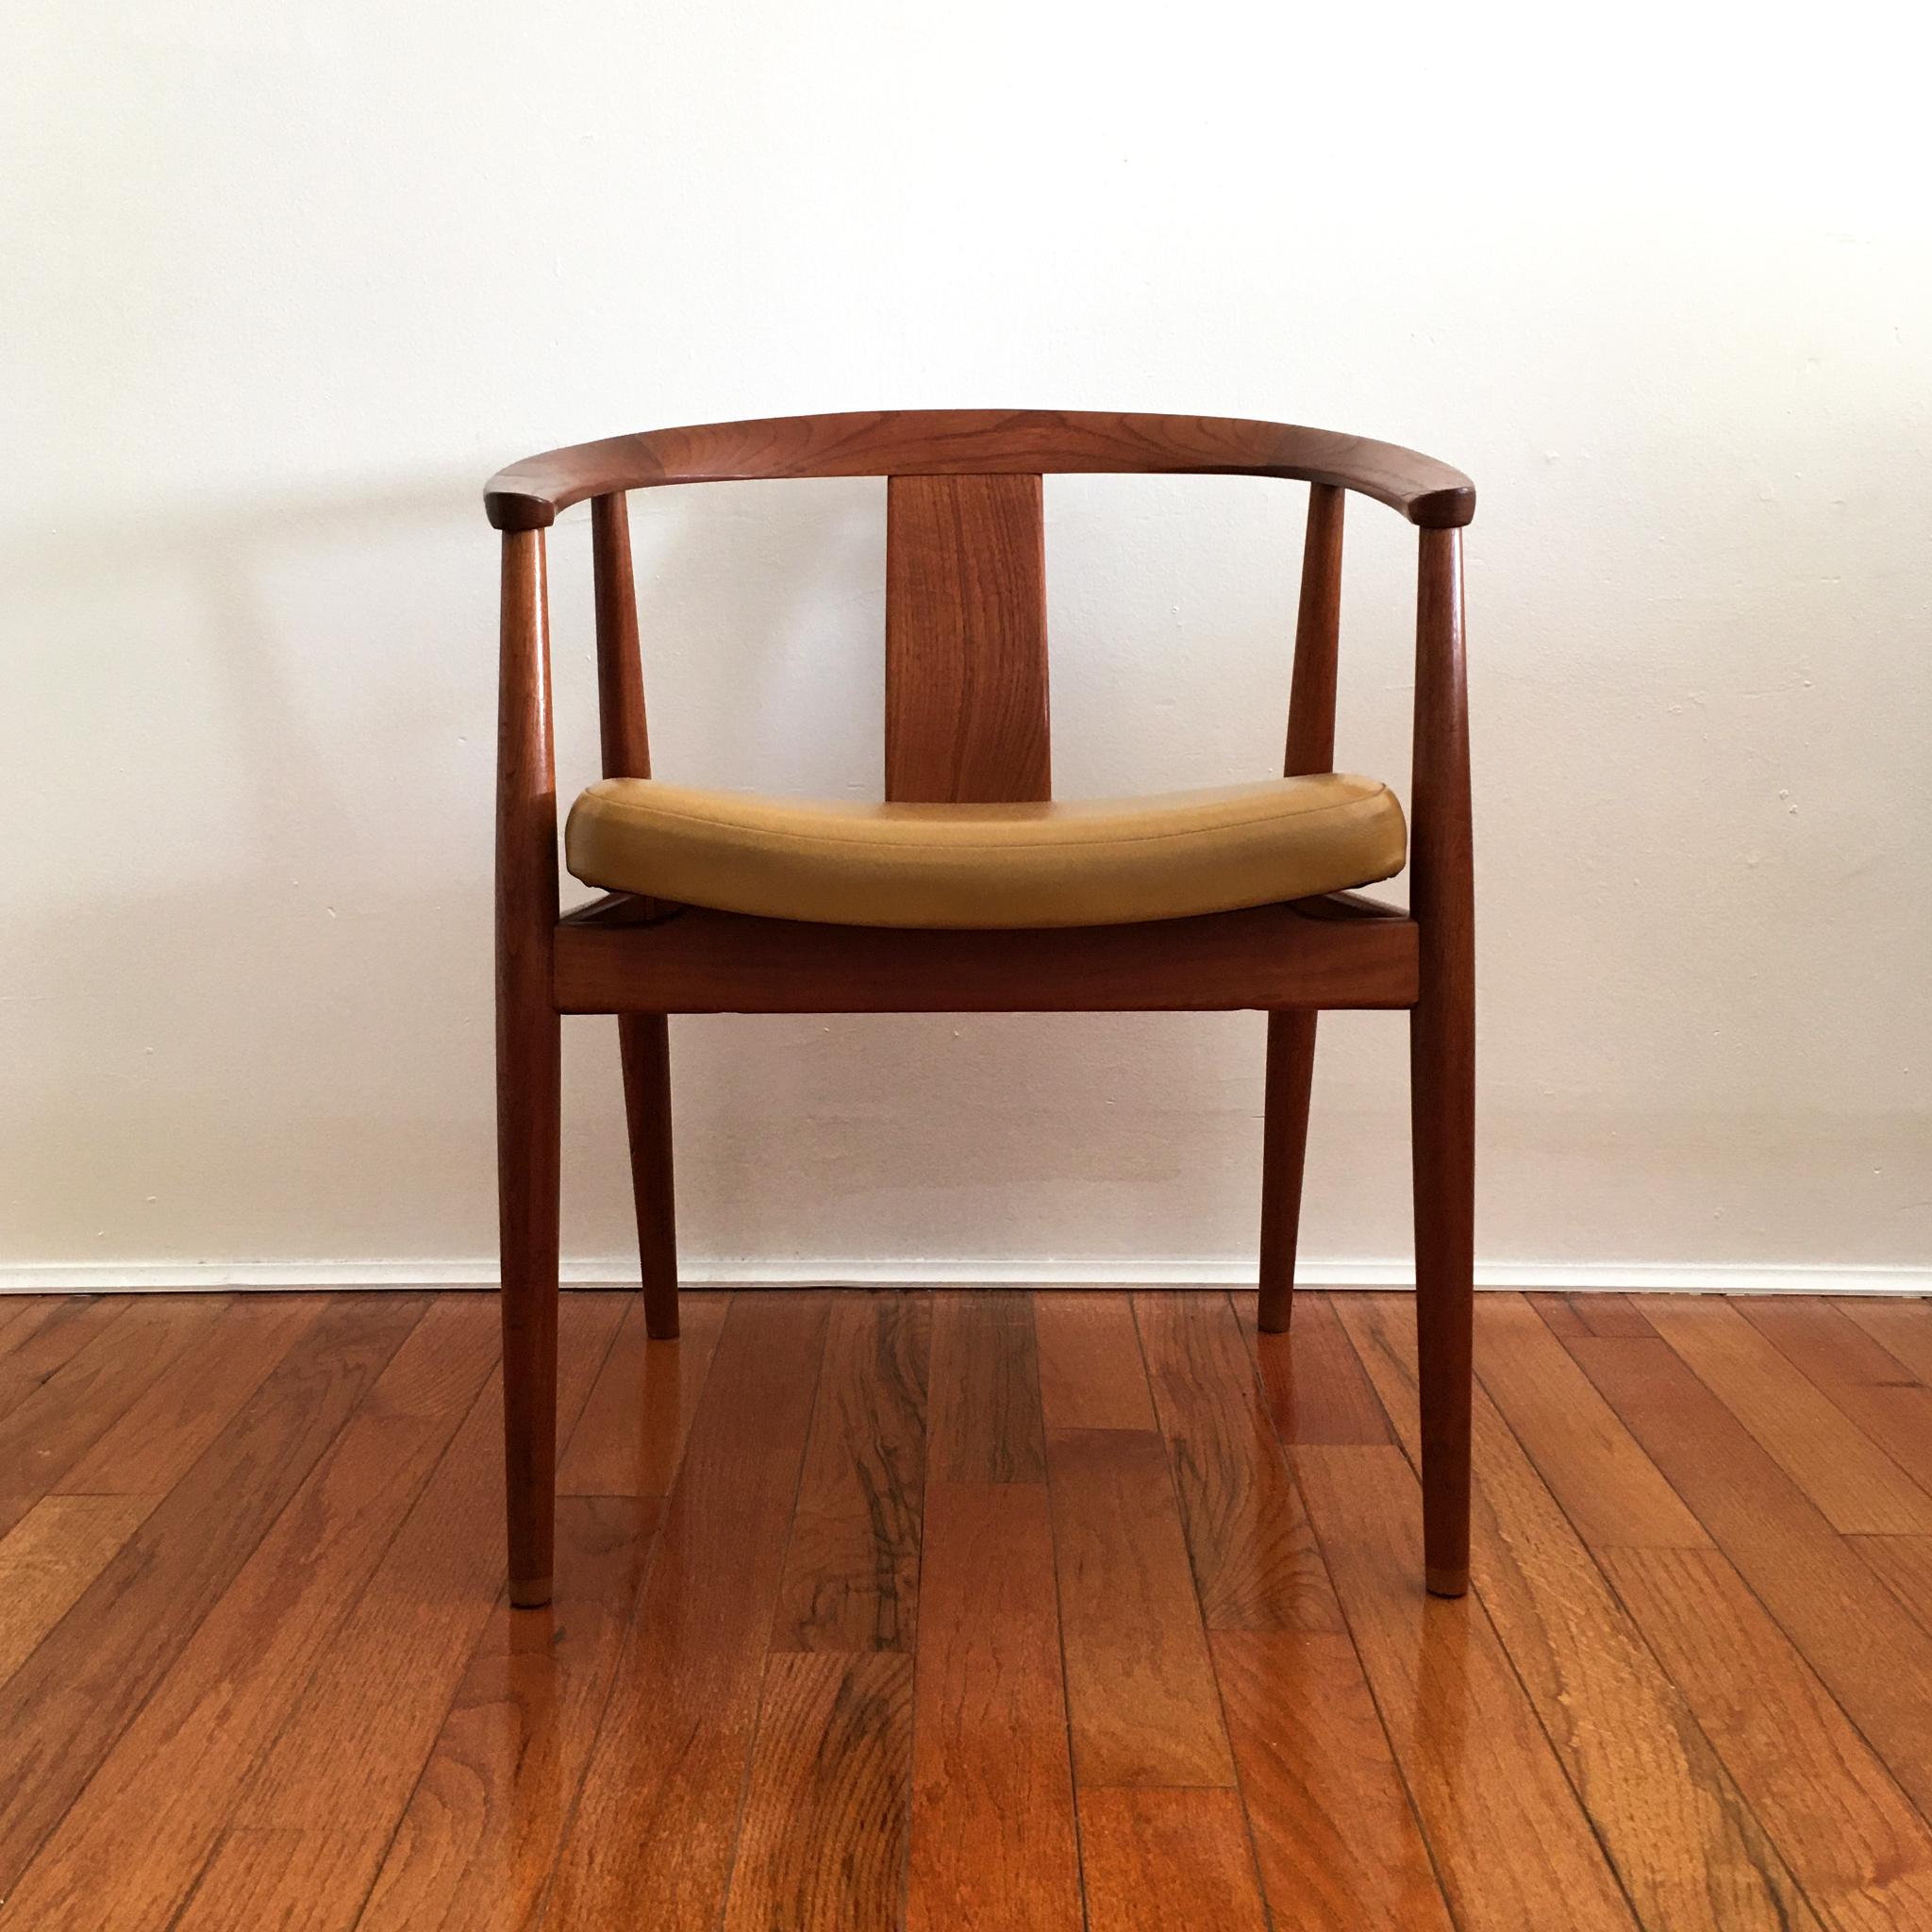 Rare Tove & Edvard Kindt-Larsen teak side chair with yellow ochre leather seat. Stunning design.

Measurements:
H: 29